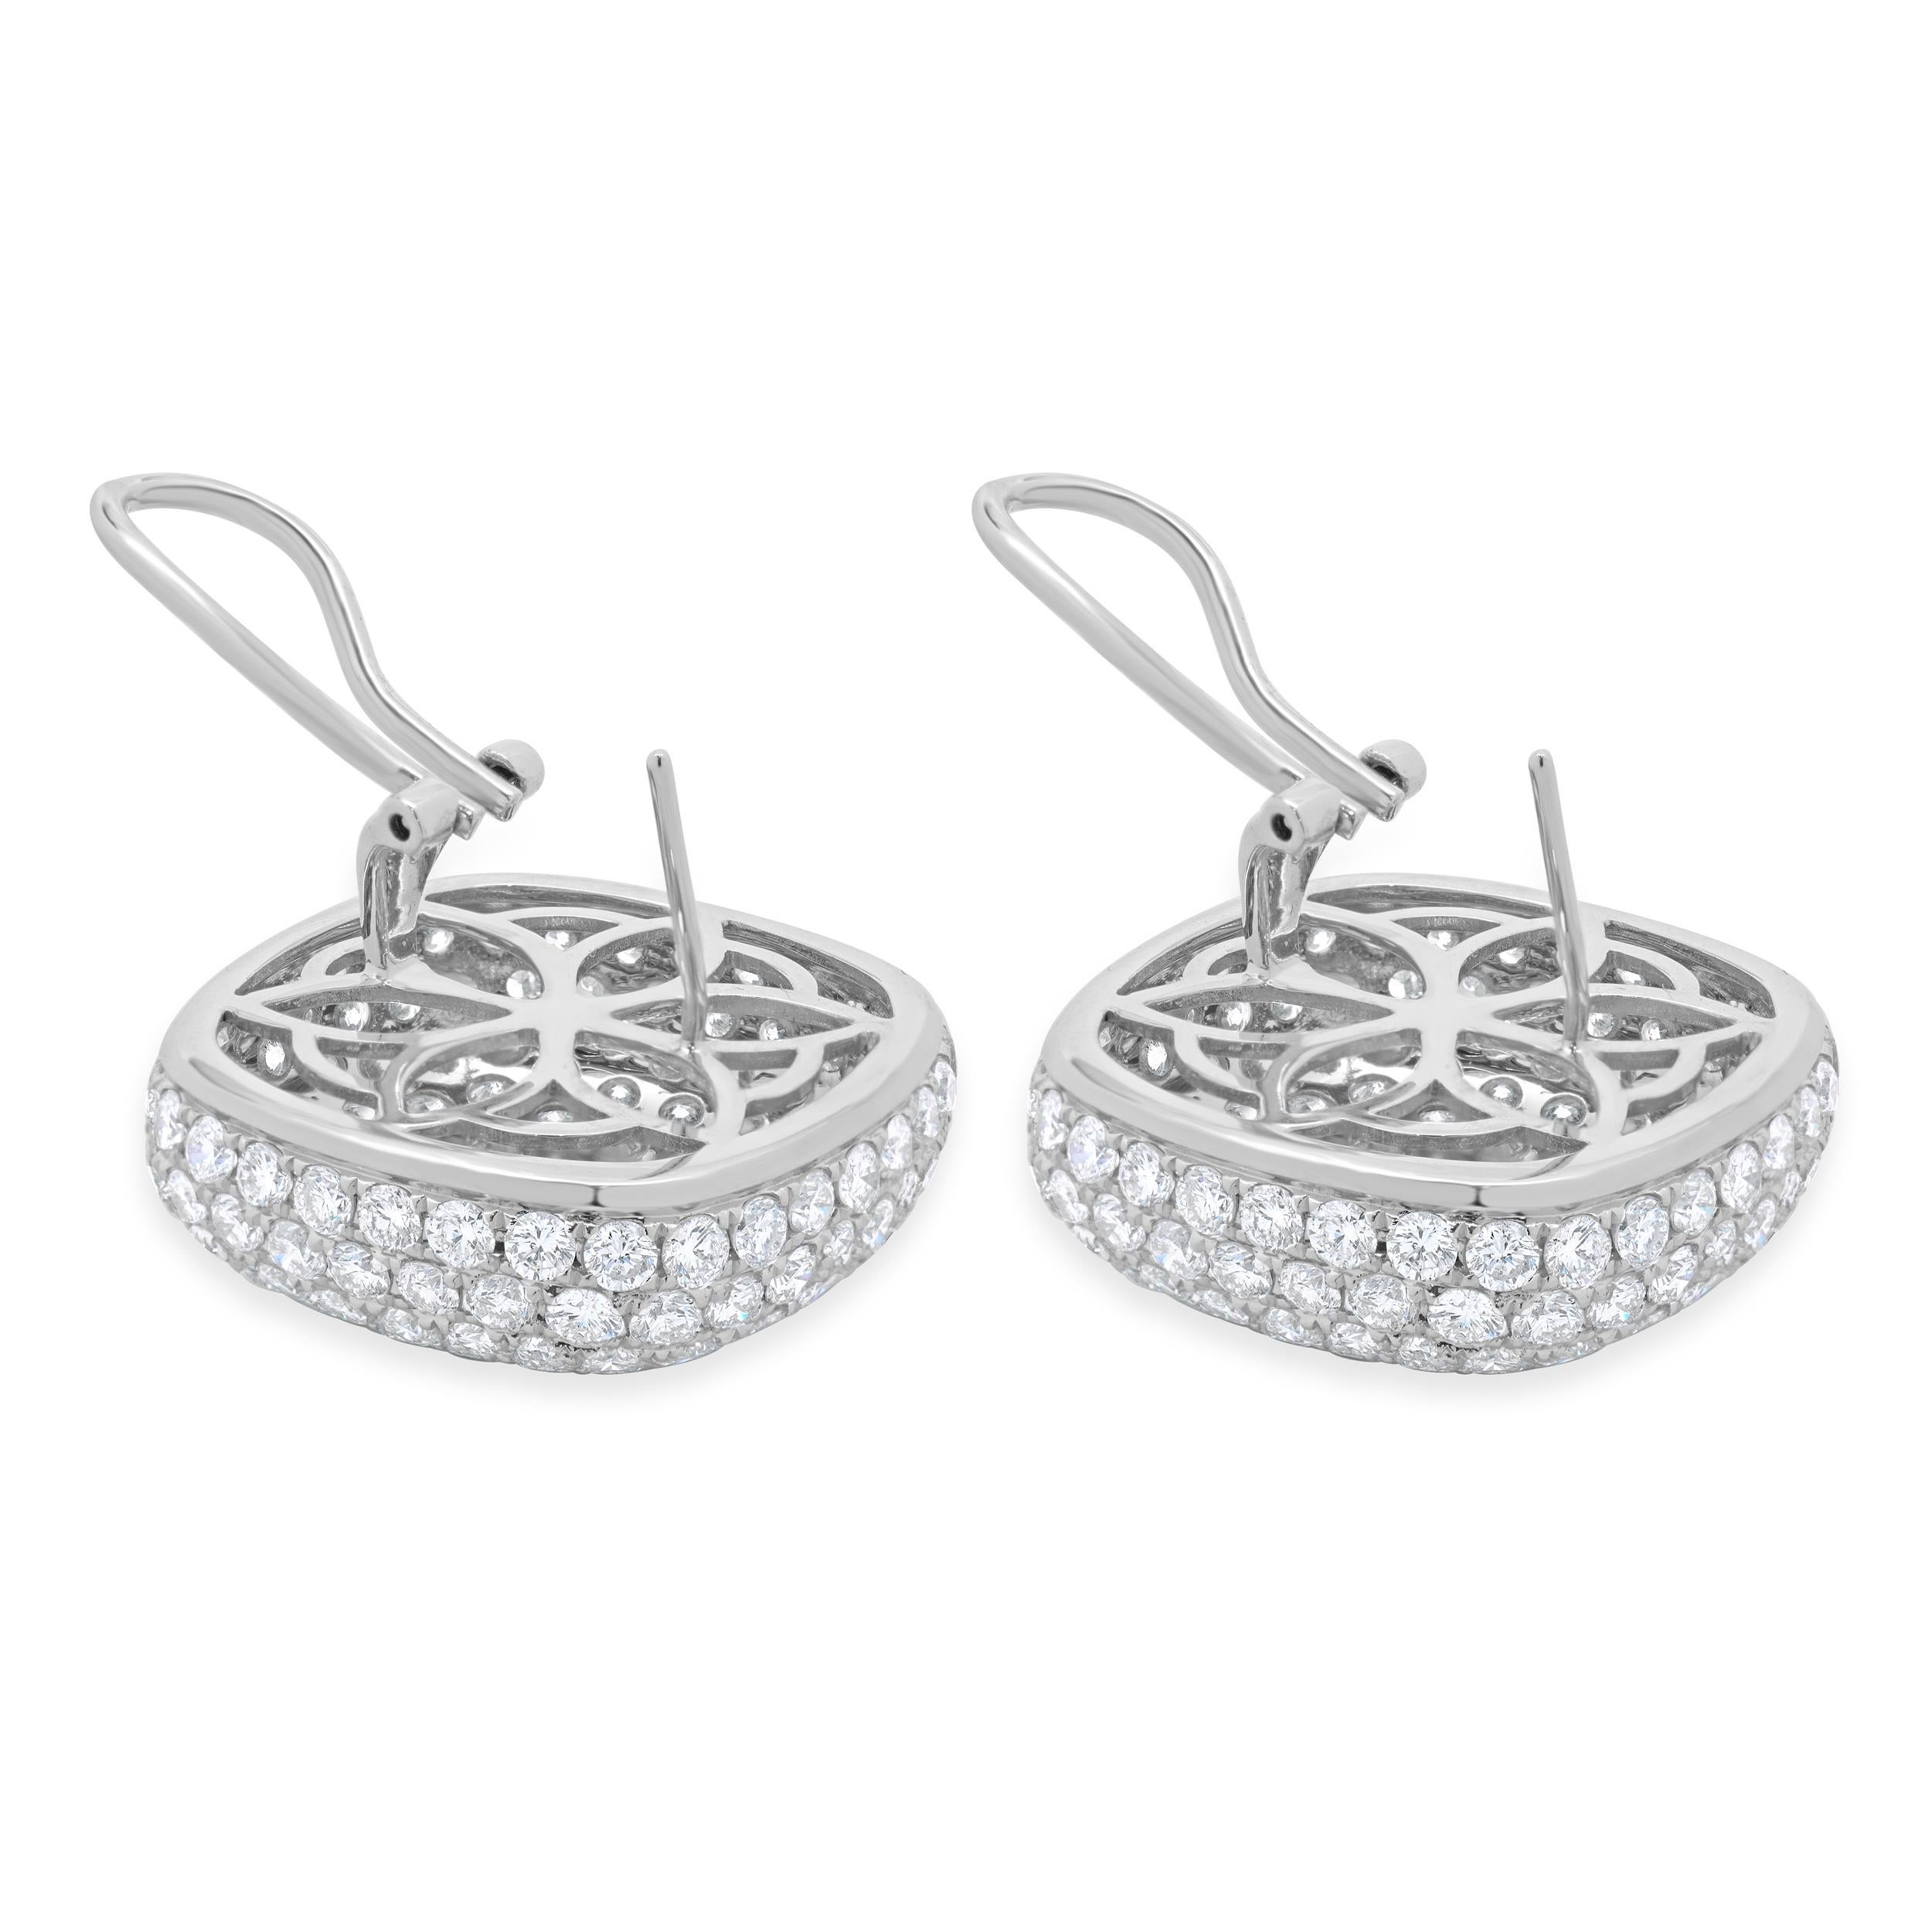 18 Karat White Gold Pave Diamond Button Earrings In Excellent Condition For Sale In Scottsdale, AZ